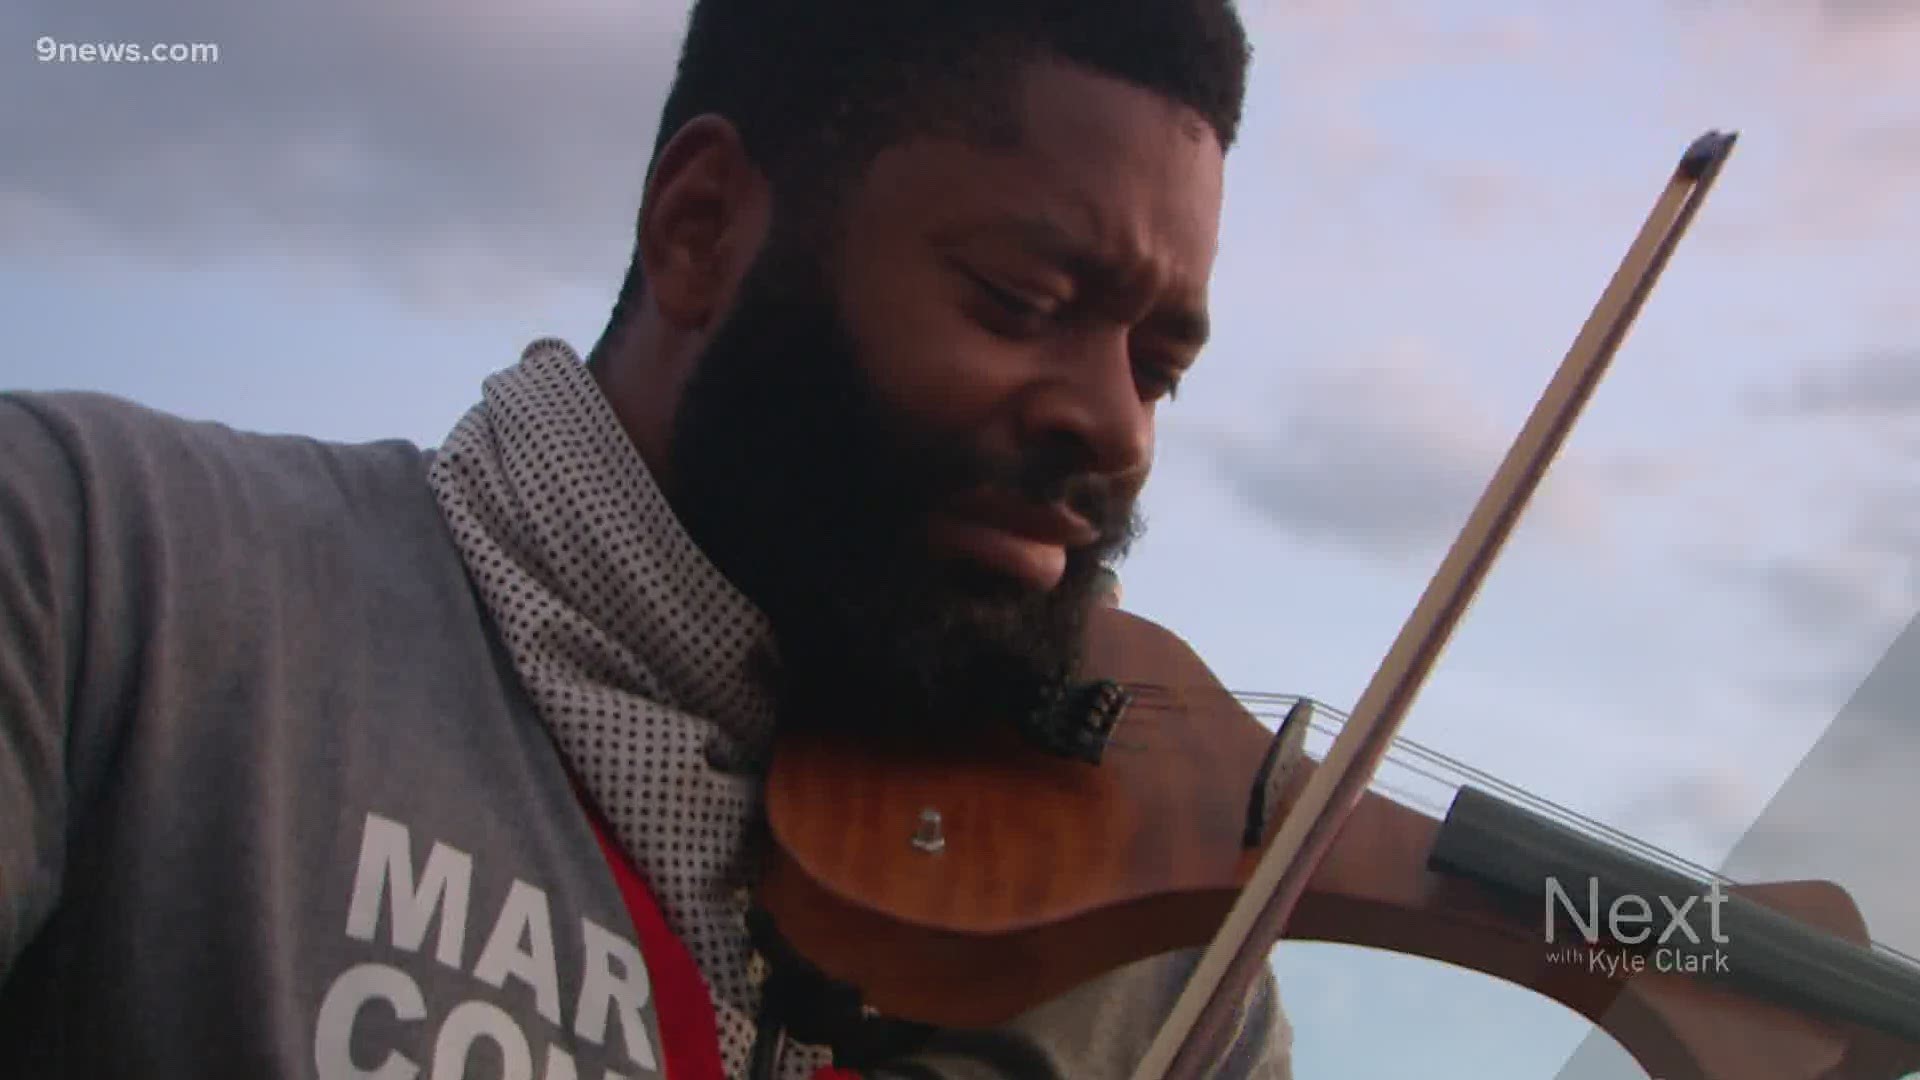 The violin has become a nationwide symbol for Elijah McClain protests, and it started in Aurora on Saturday, when Jeff Hughes performed during clashes with police.